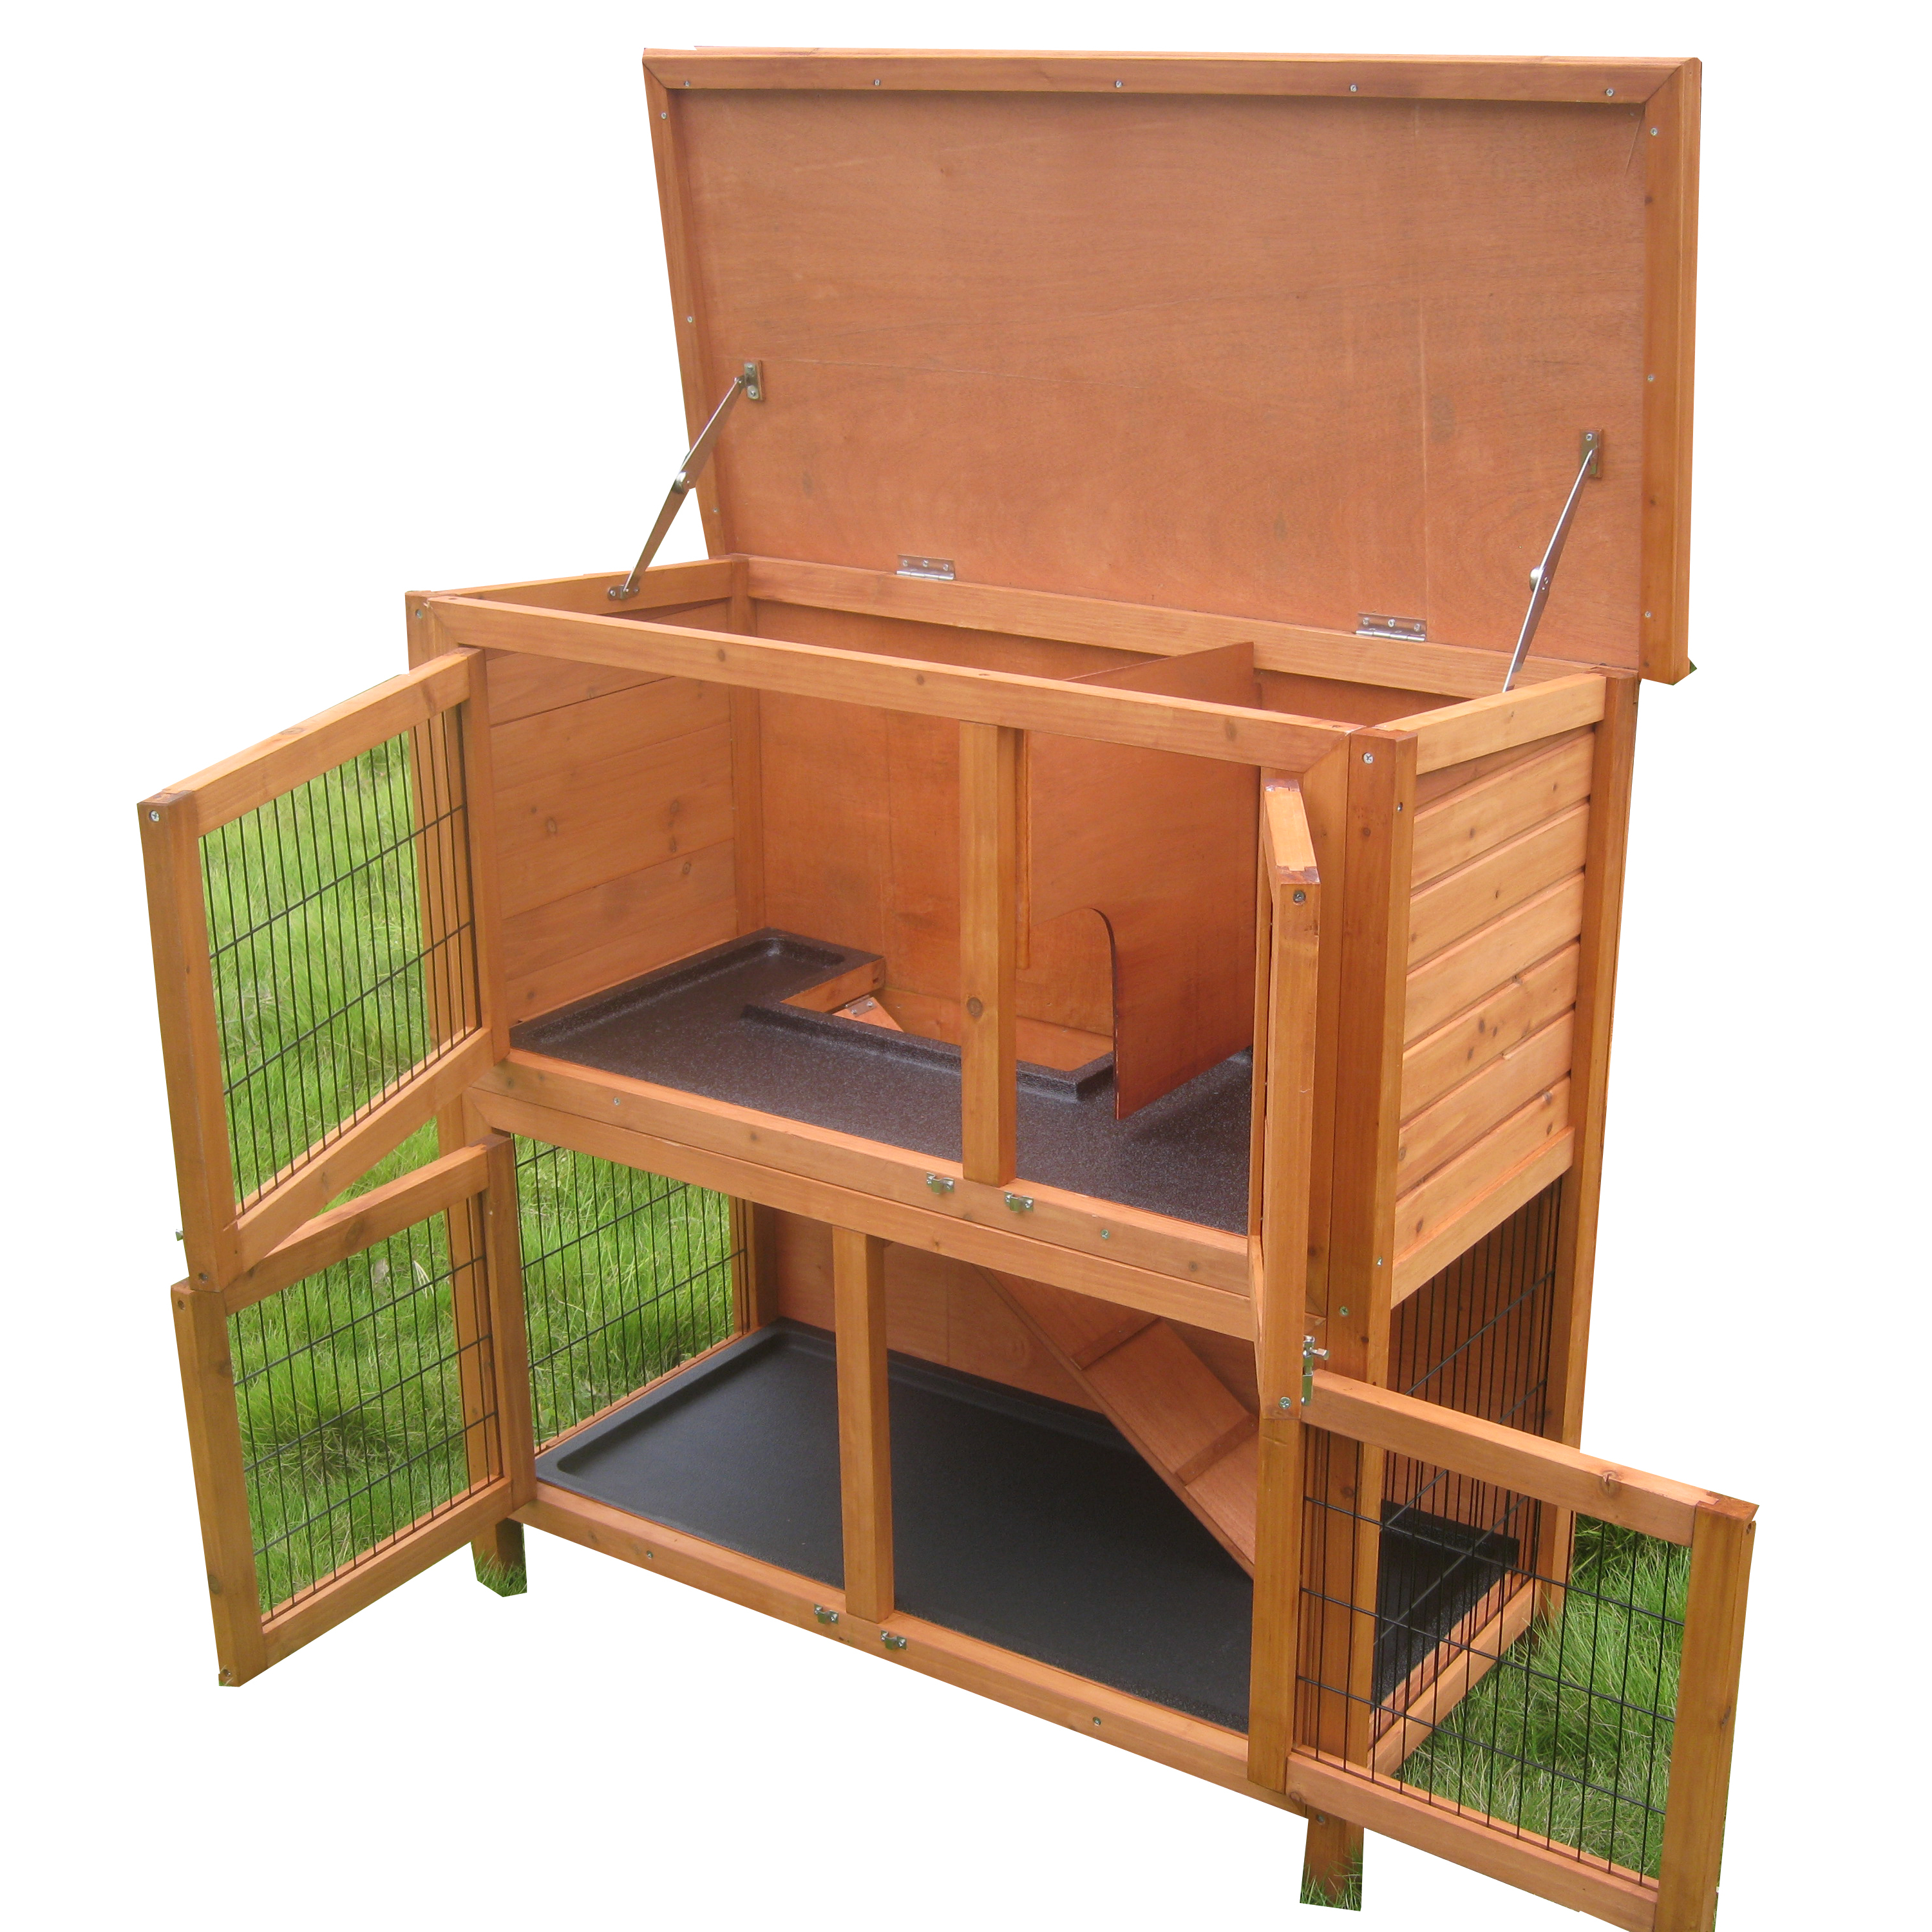 Ordinary Discount Dog Cage -
 Cheap Outdoor Garden Backyard commercial Large two storey Wood Industrial Habitats ferret Guinea Pig Bunny Cages Rabbit hutch – Easy